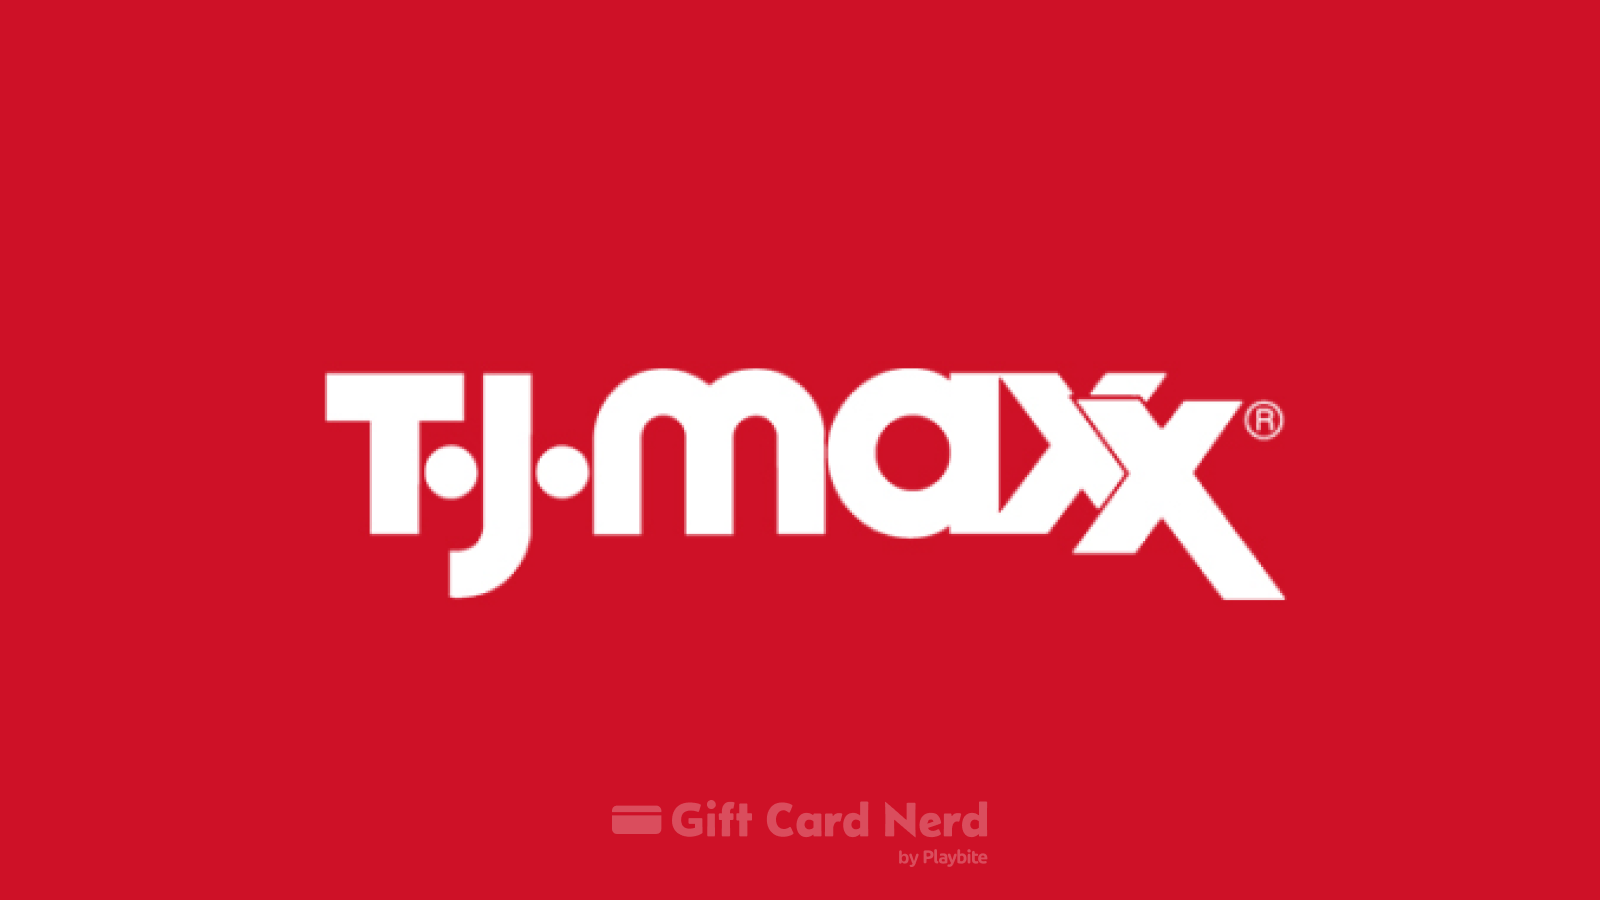 Does CVS Sell T.J. Maxx Gift Cards?